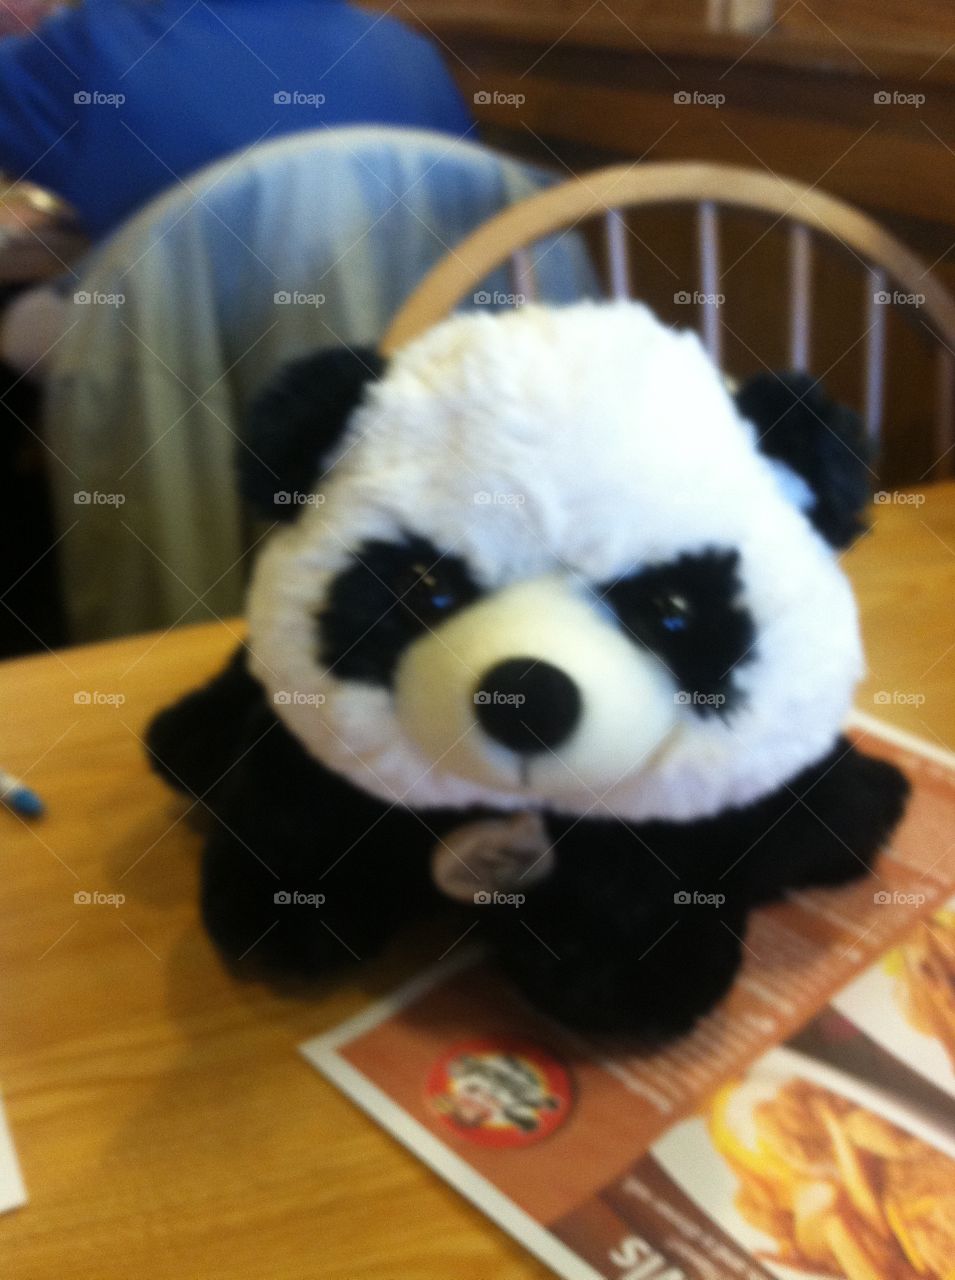 This panda is staring at me!!!. Favorite child's toy, stuffed panda scares me with it's angry face. I always feel like it is staring at me!